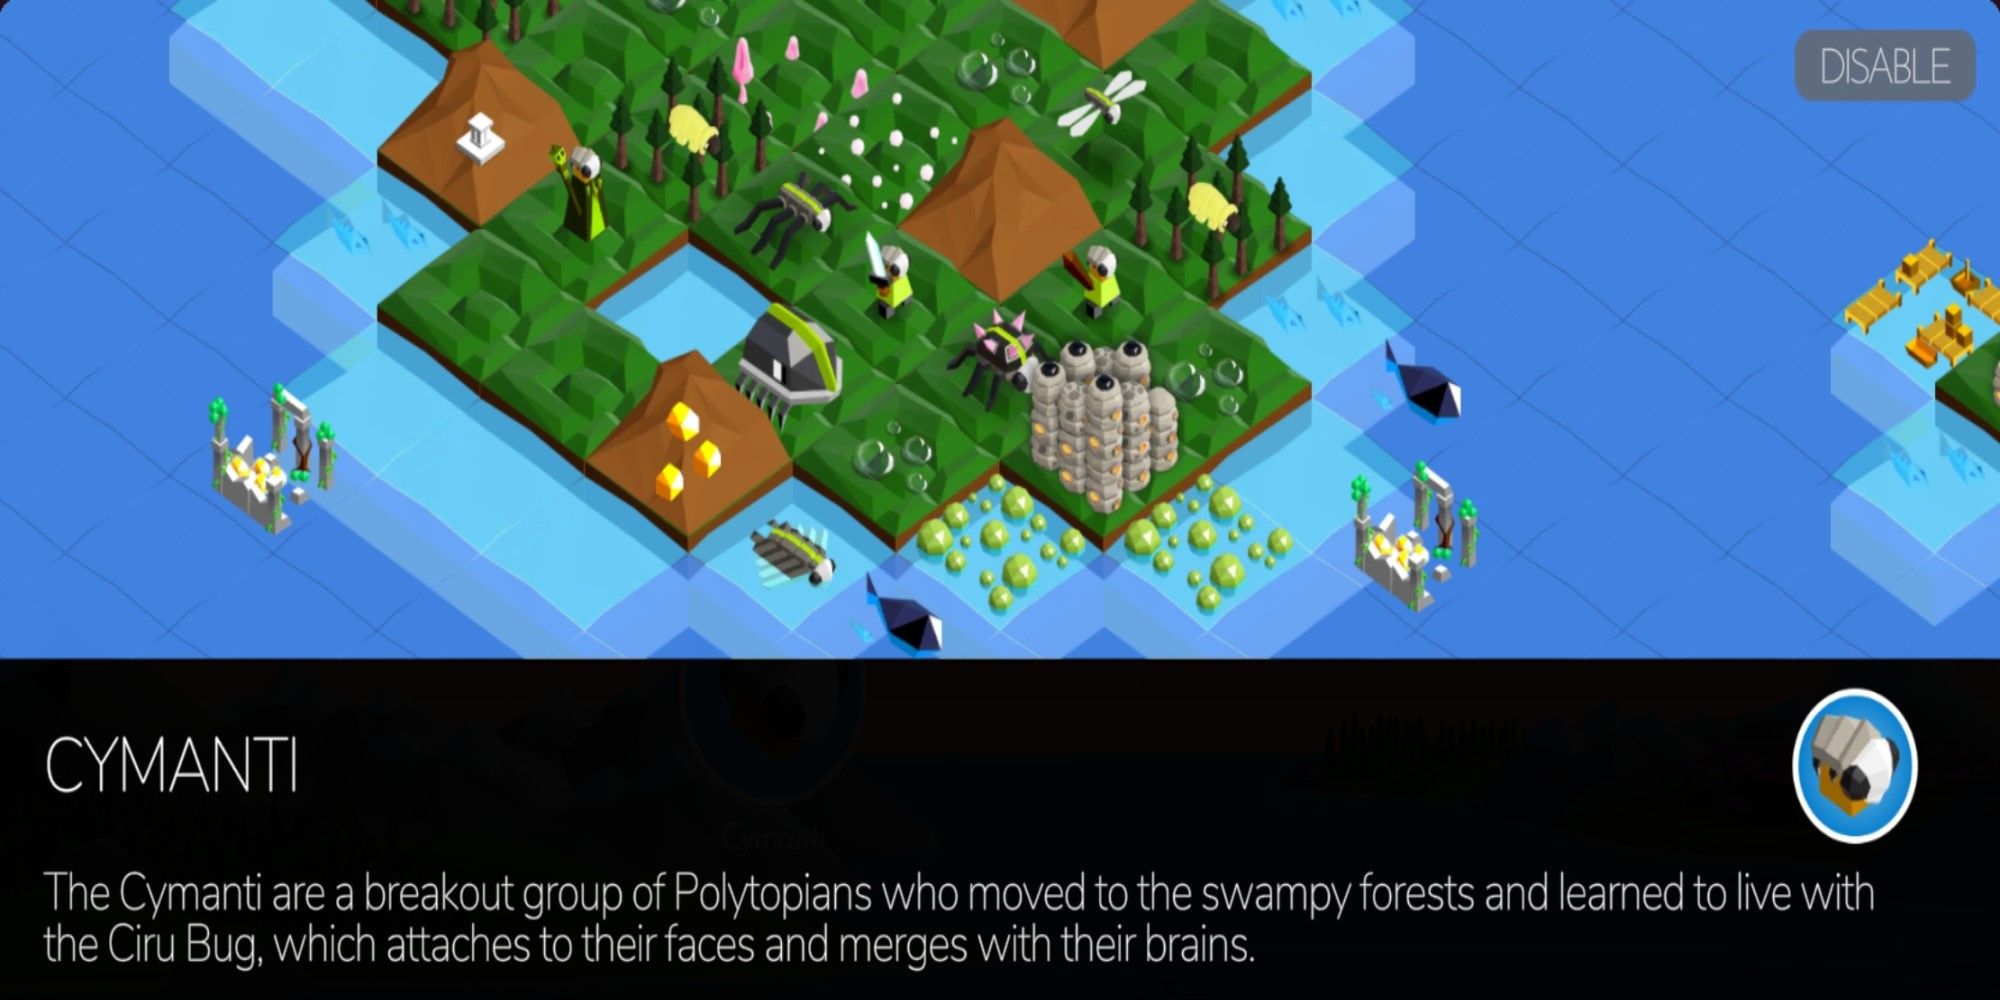 Information on the Cymanti Tribe from Battle of Polytopia.